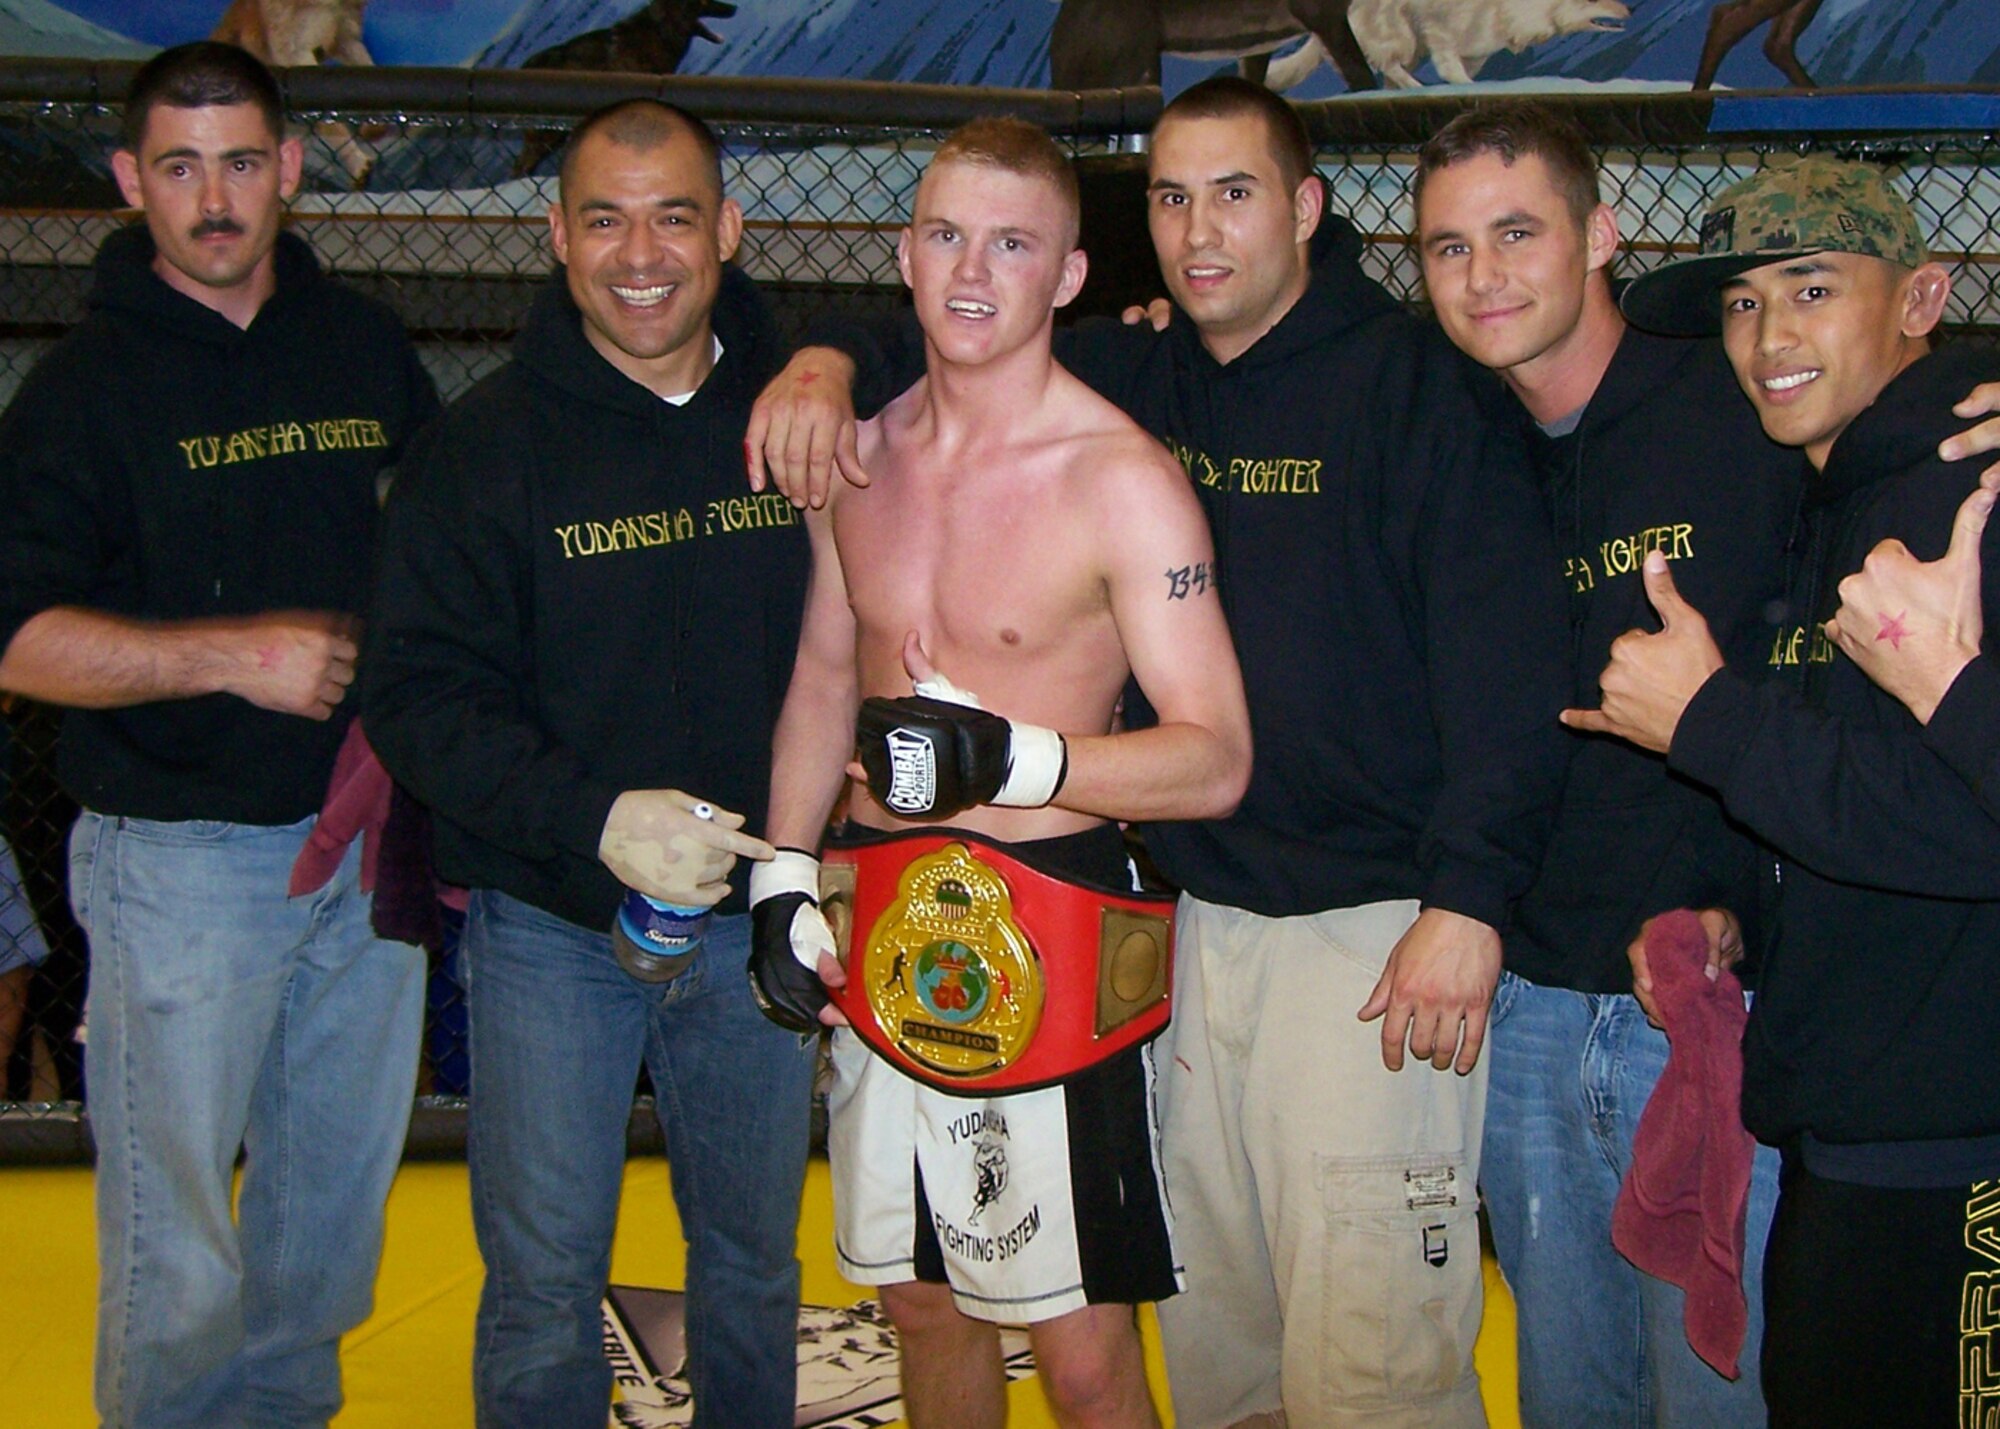 EIELSON AIR FORCE BASE, Alaska--Brett Laswell (center), an Airman with the 354th Maintenance Squadron, poses with team mates after defeating reigning bantam weight title holder Jeff Baily of Fairbanks' Gladiators Mixed Martial Arts team with a reverse arm bar two minutes and 45 seconds into the first round June 22. Laswell?s victory brings his record to 3-0 since he began competing in March of this year. (courtesy photo)